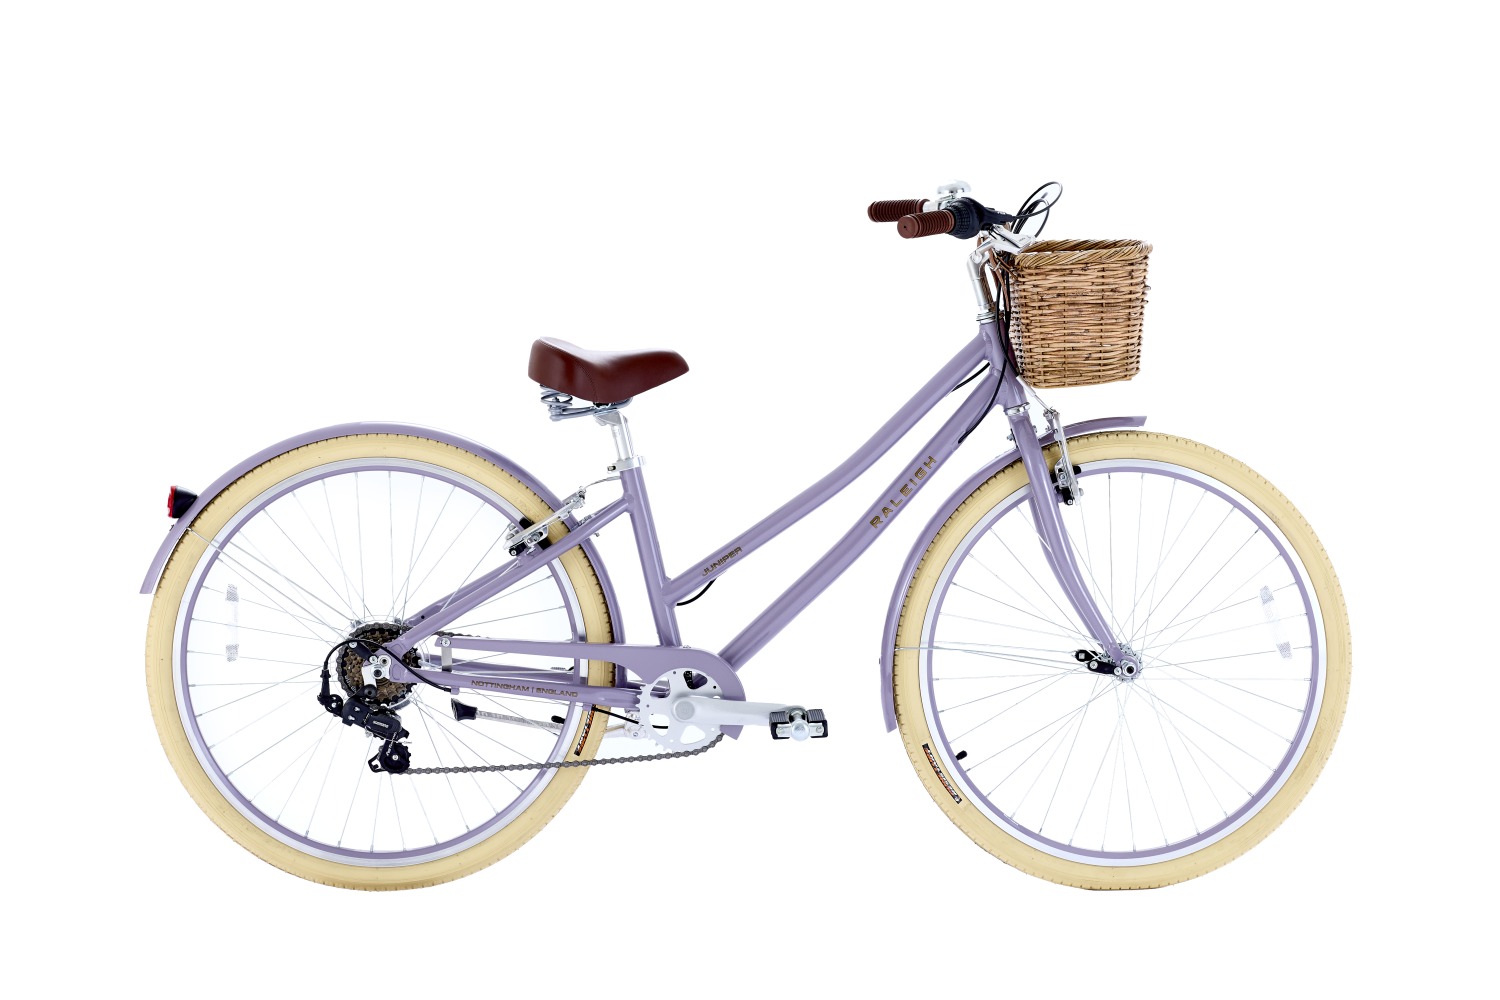 The Raleigh Juniper in lilac is a classic style kids bike with a step through frame and basket